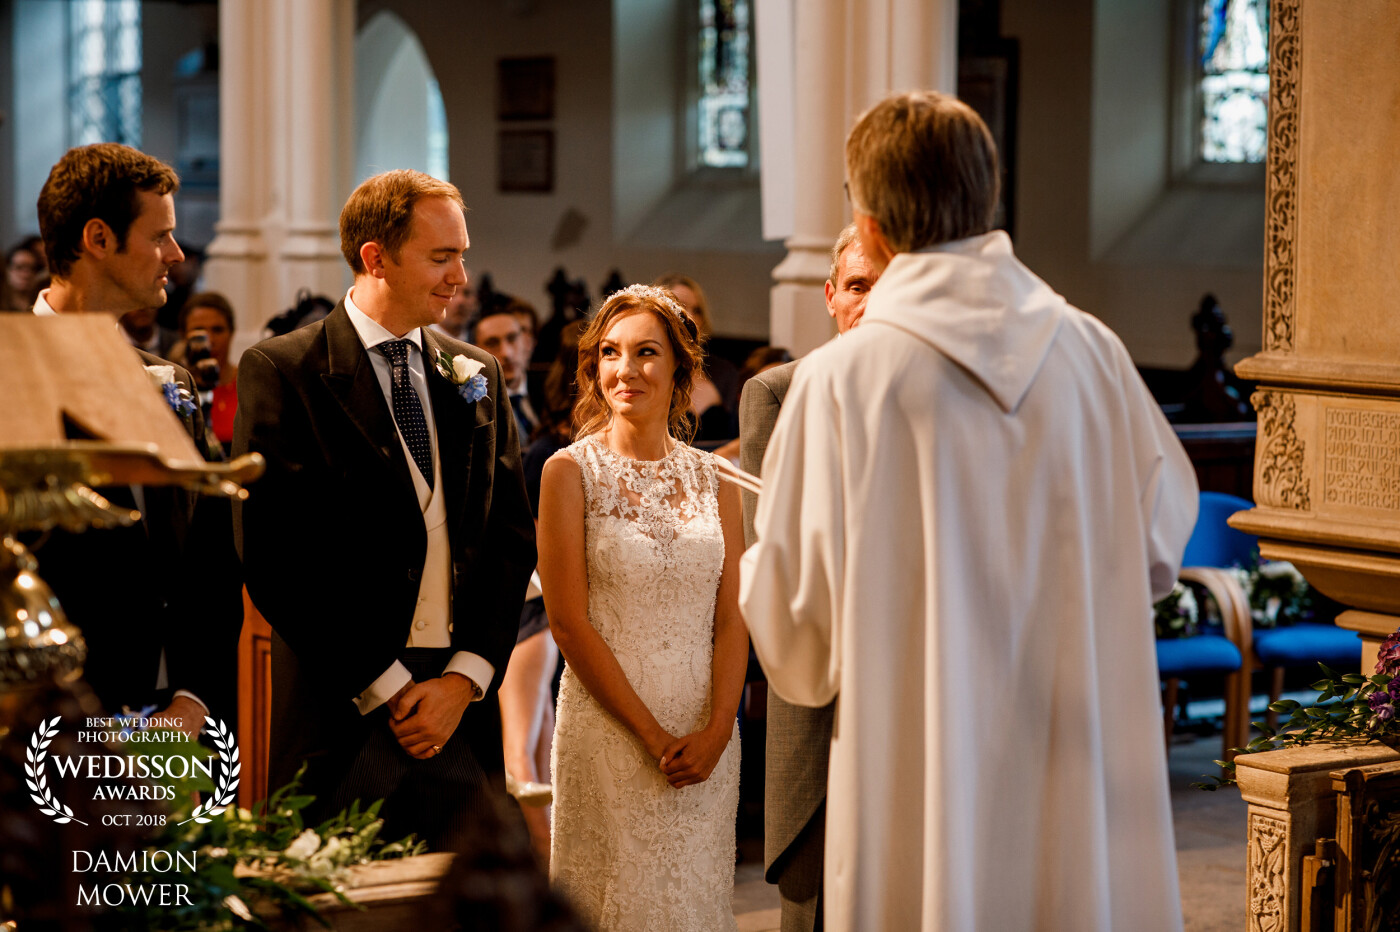 A cheeky moment between Andrea and Andrew at the ceremony - a loving and knowing glance and a stolen shot from me as the vicar told me I was not to be in front of the bride and groom! <br />
Taken in Wimbledon, South West London.